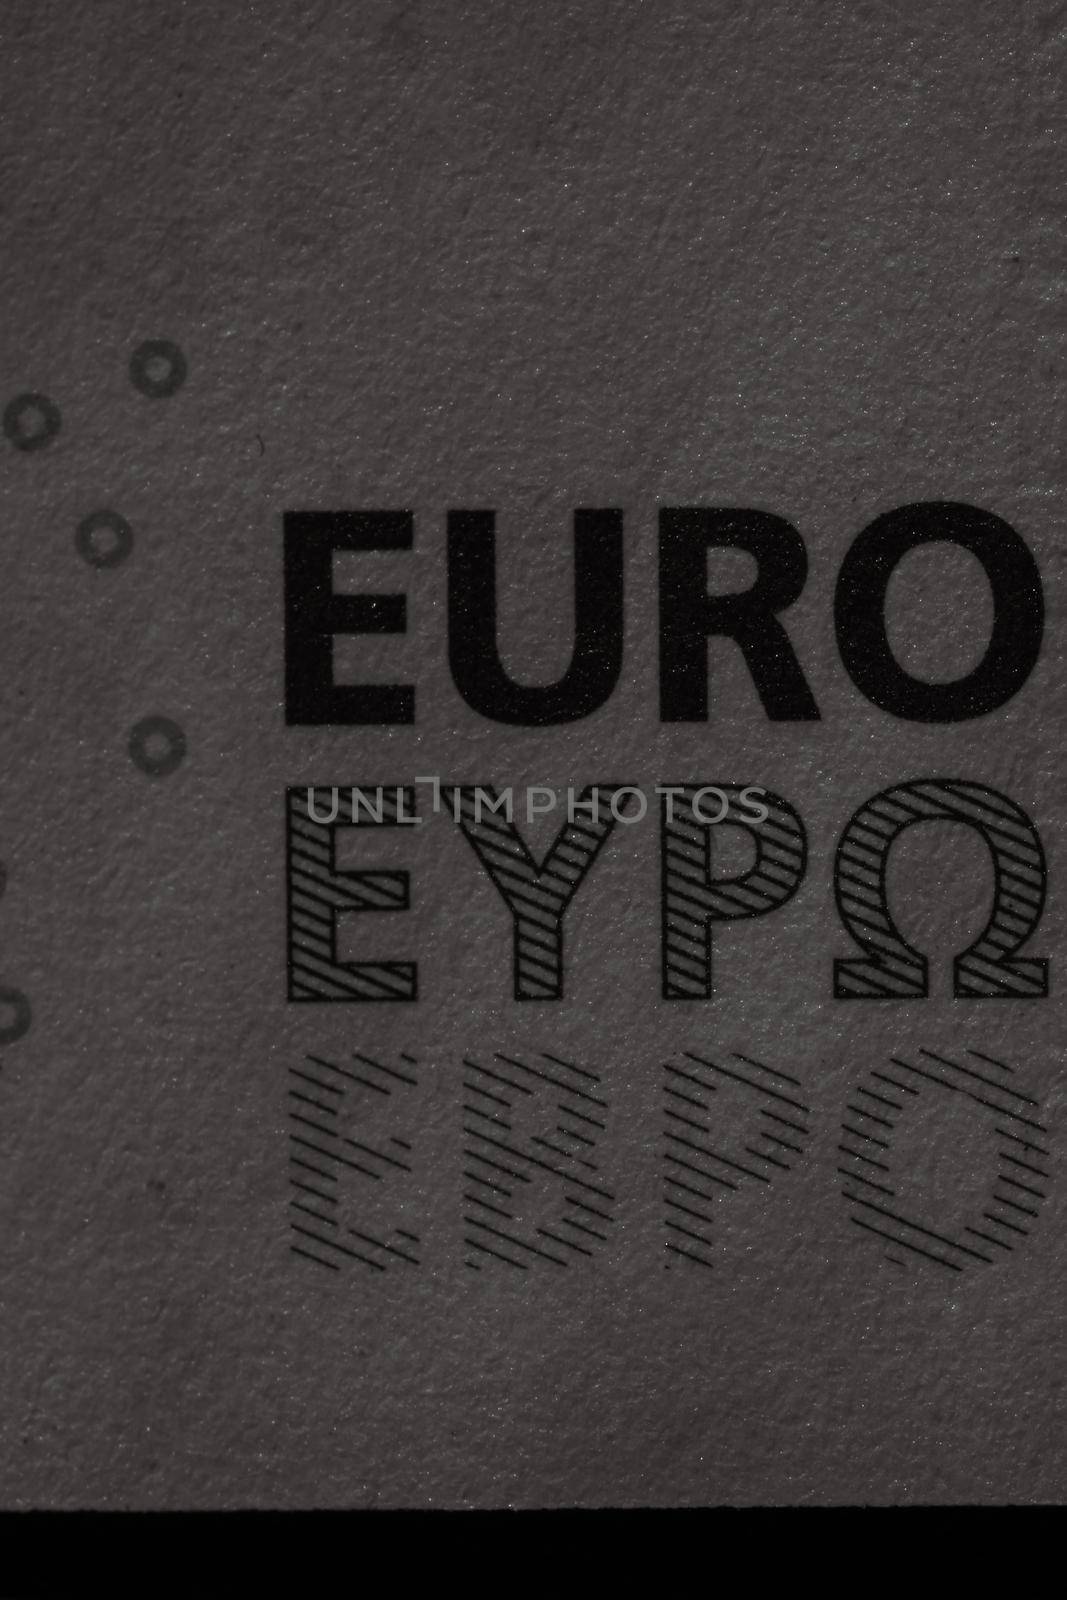 Selective focus on detail of euro banknotes. Close up macro detail of money banknotes, 10 euro isolated. World money concept, inflation and economy concept